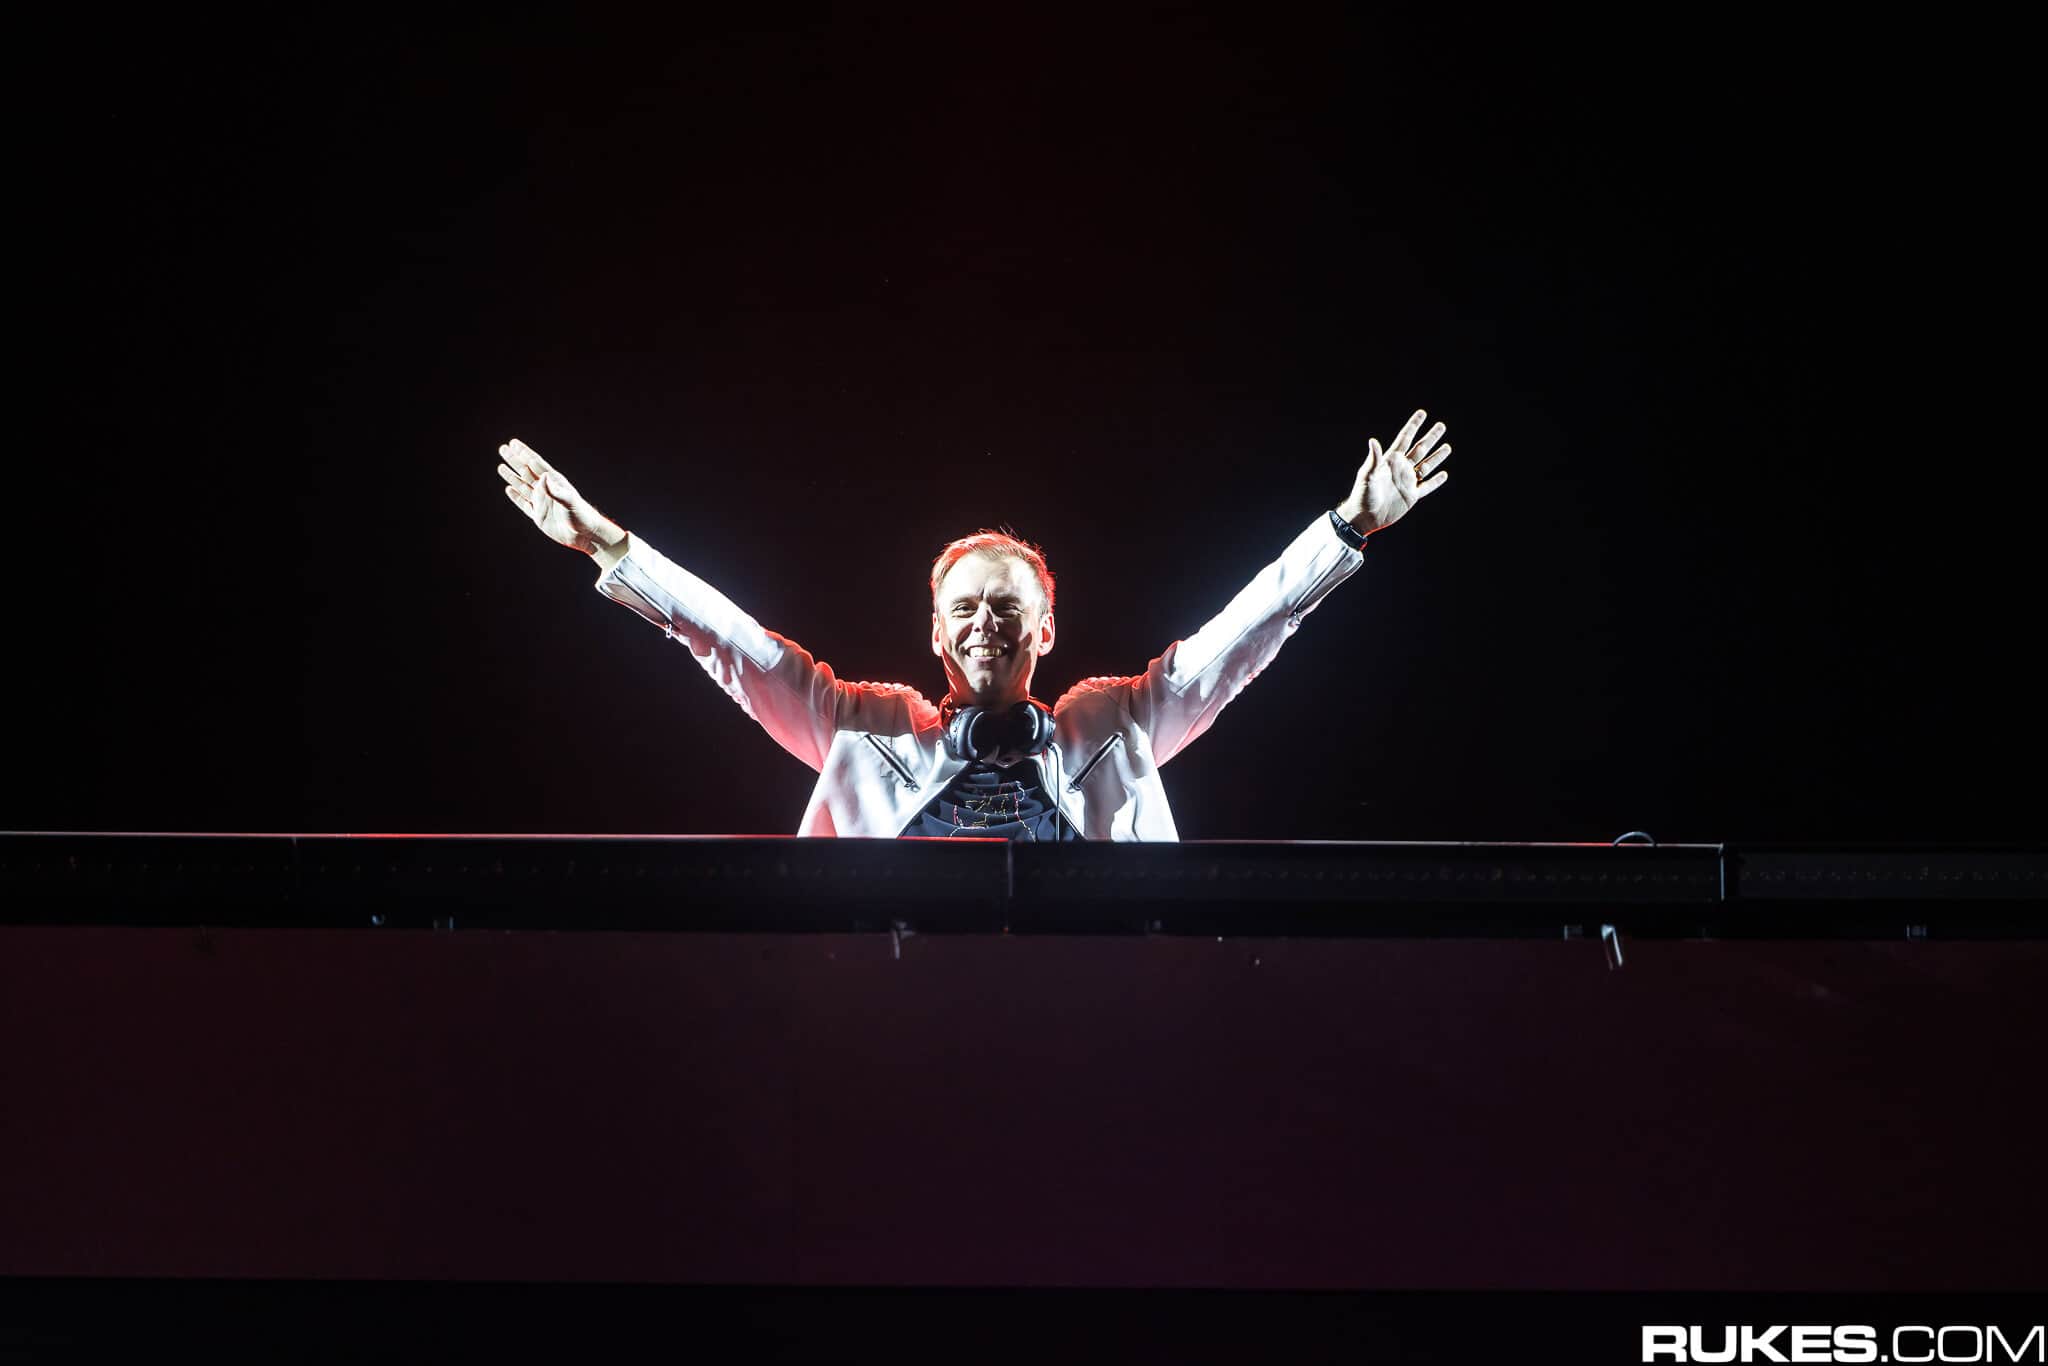 Relive the mindblowing 10-hour sold-out ASOT 950 in Utrecht